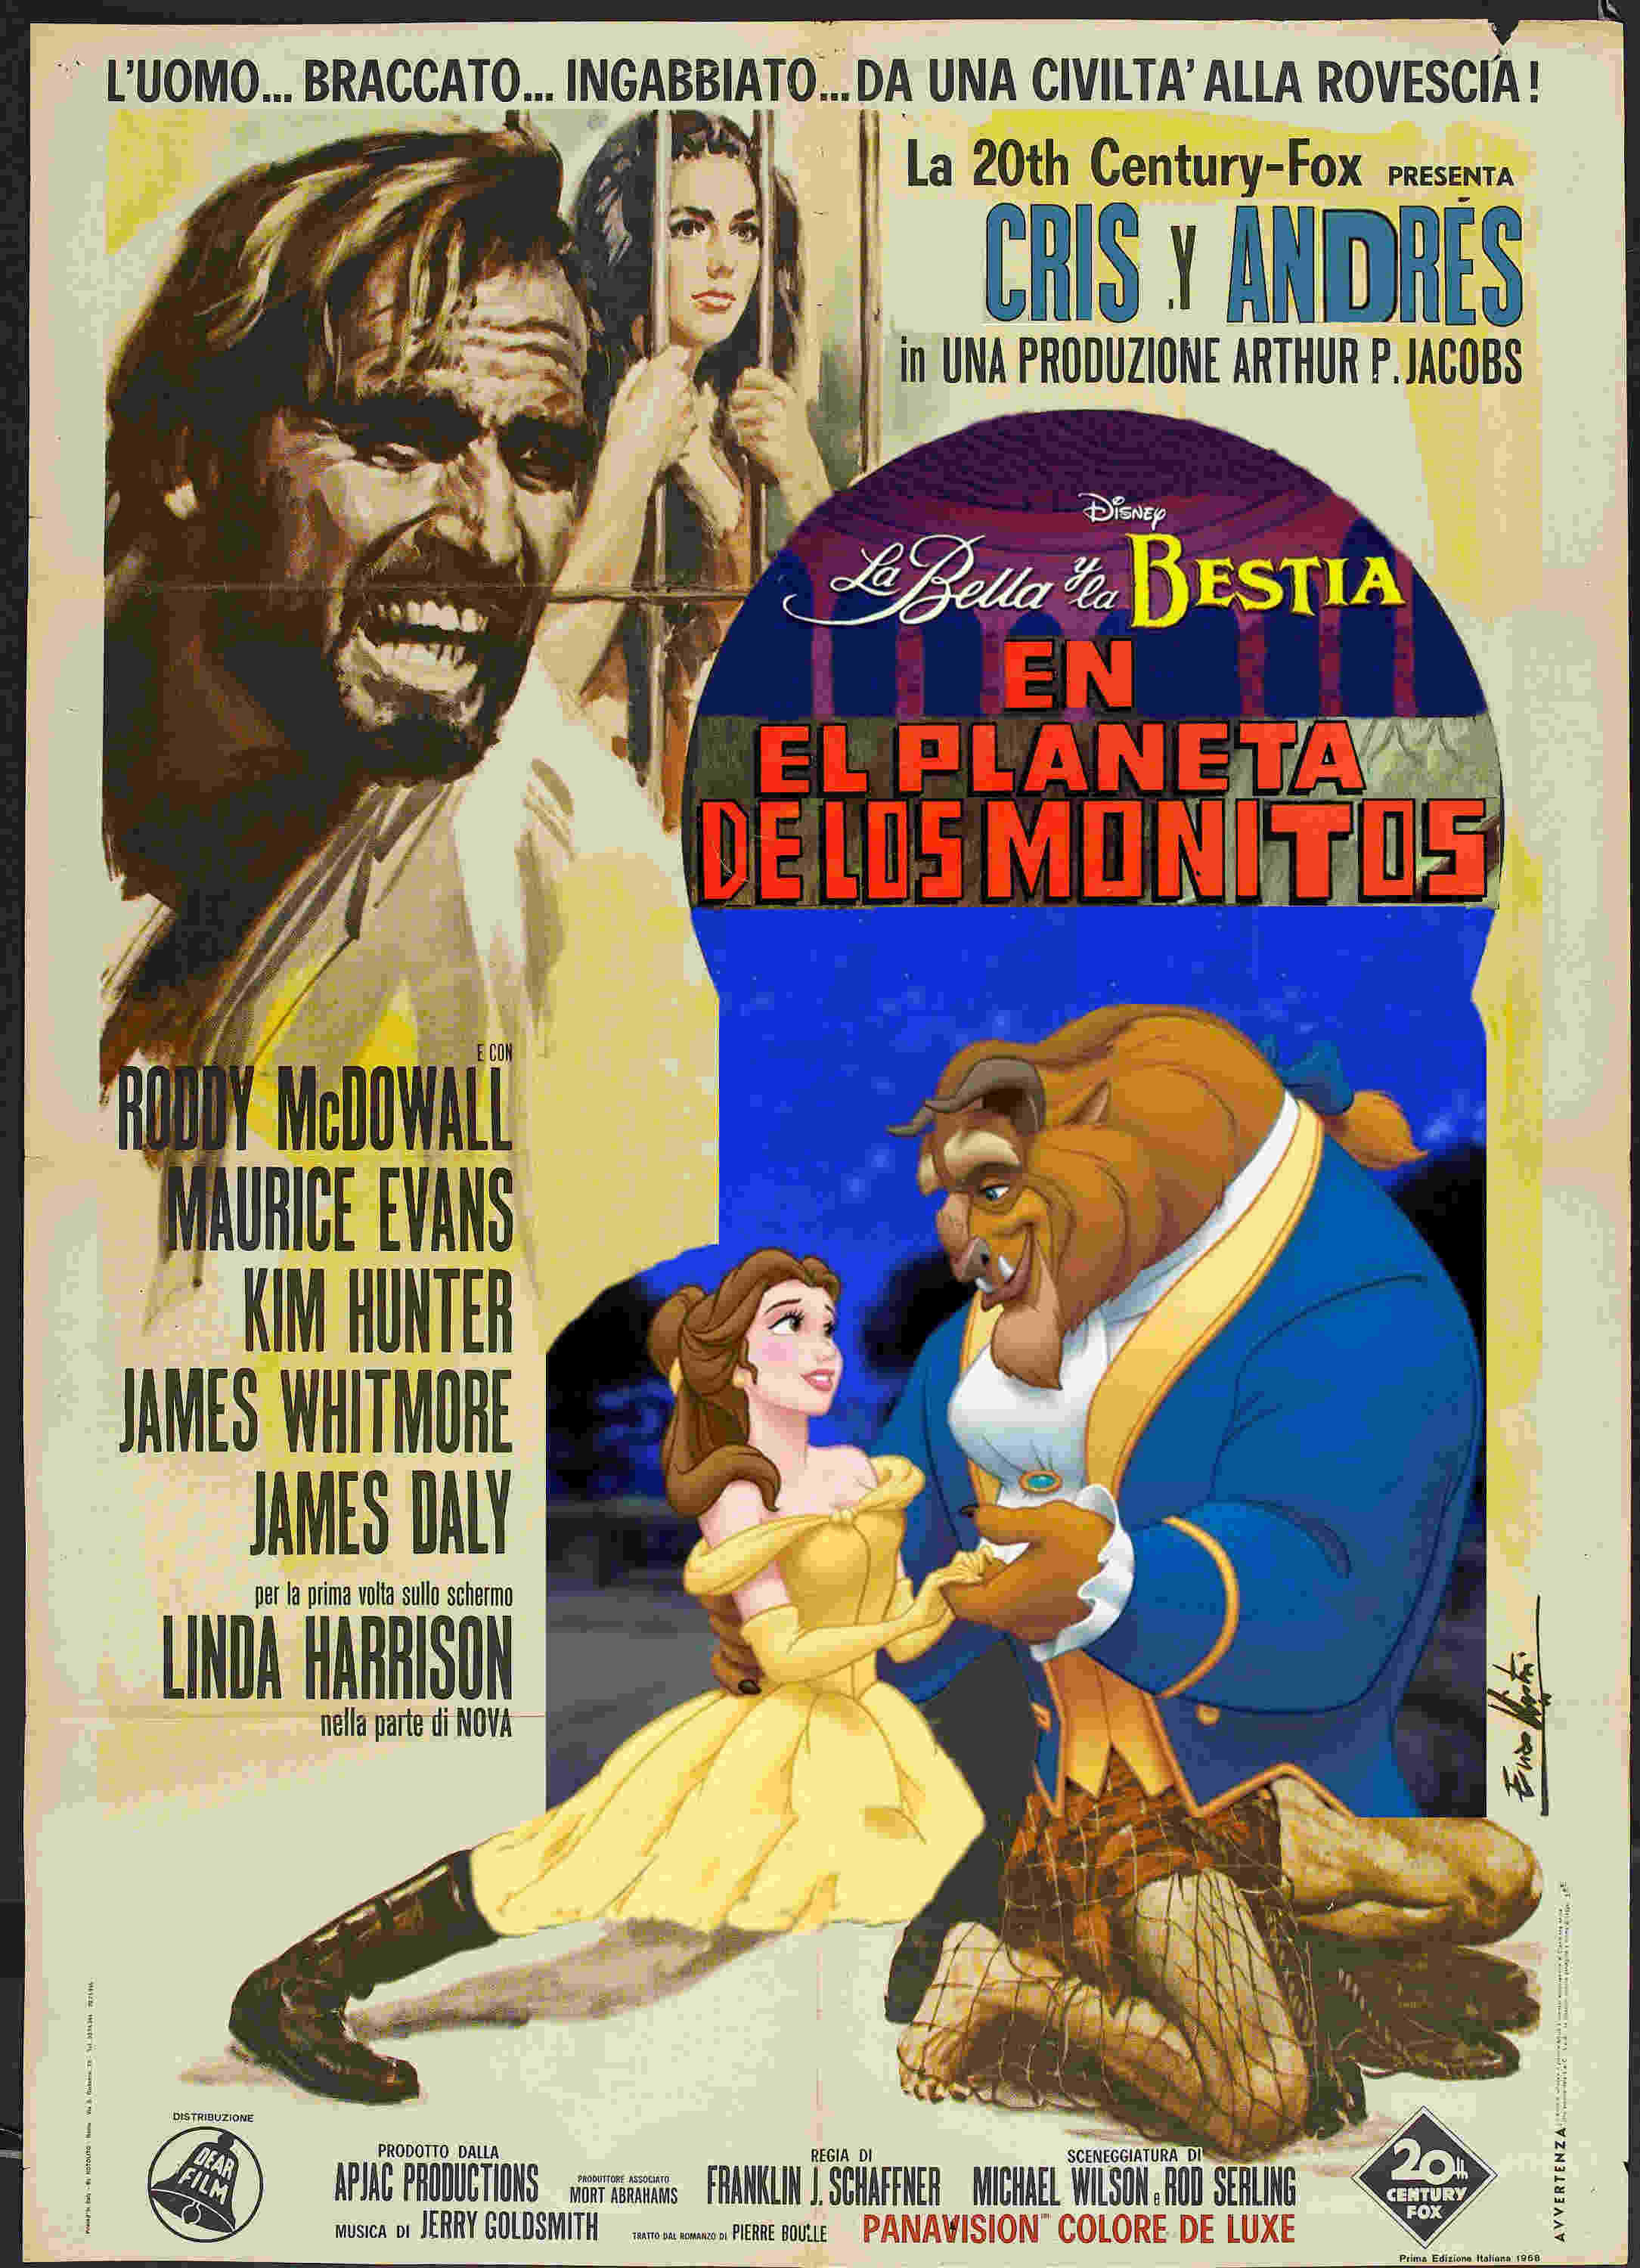 Belle Beast and the planet of the Apes